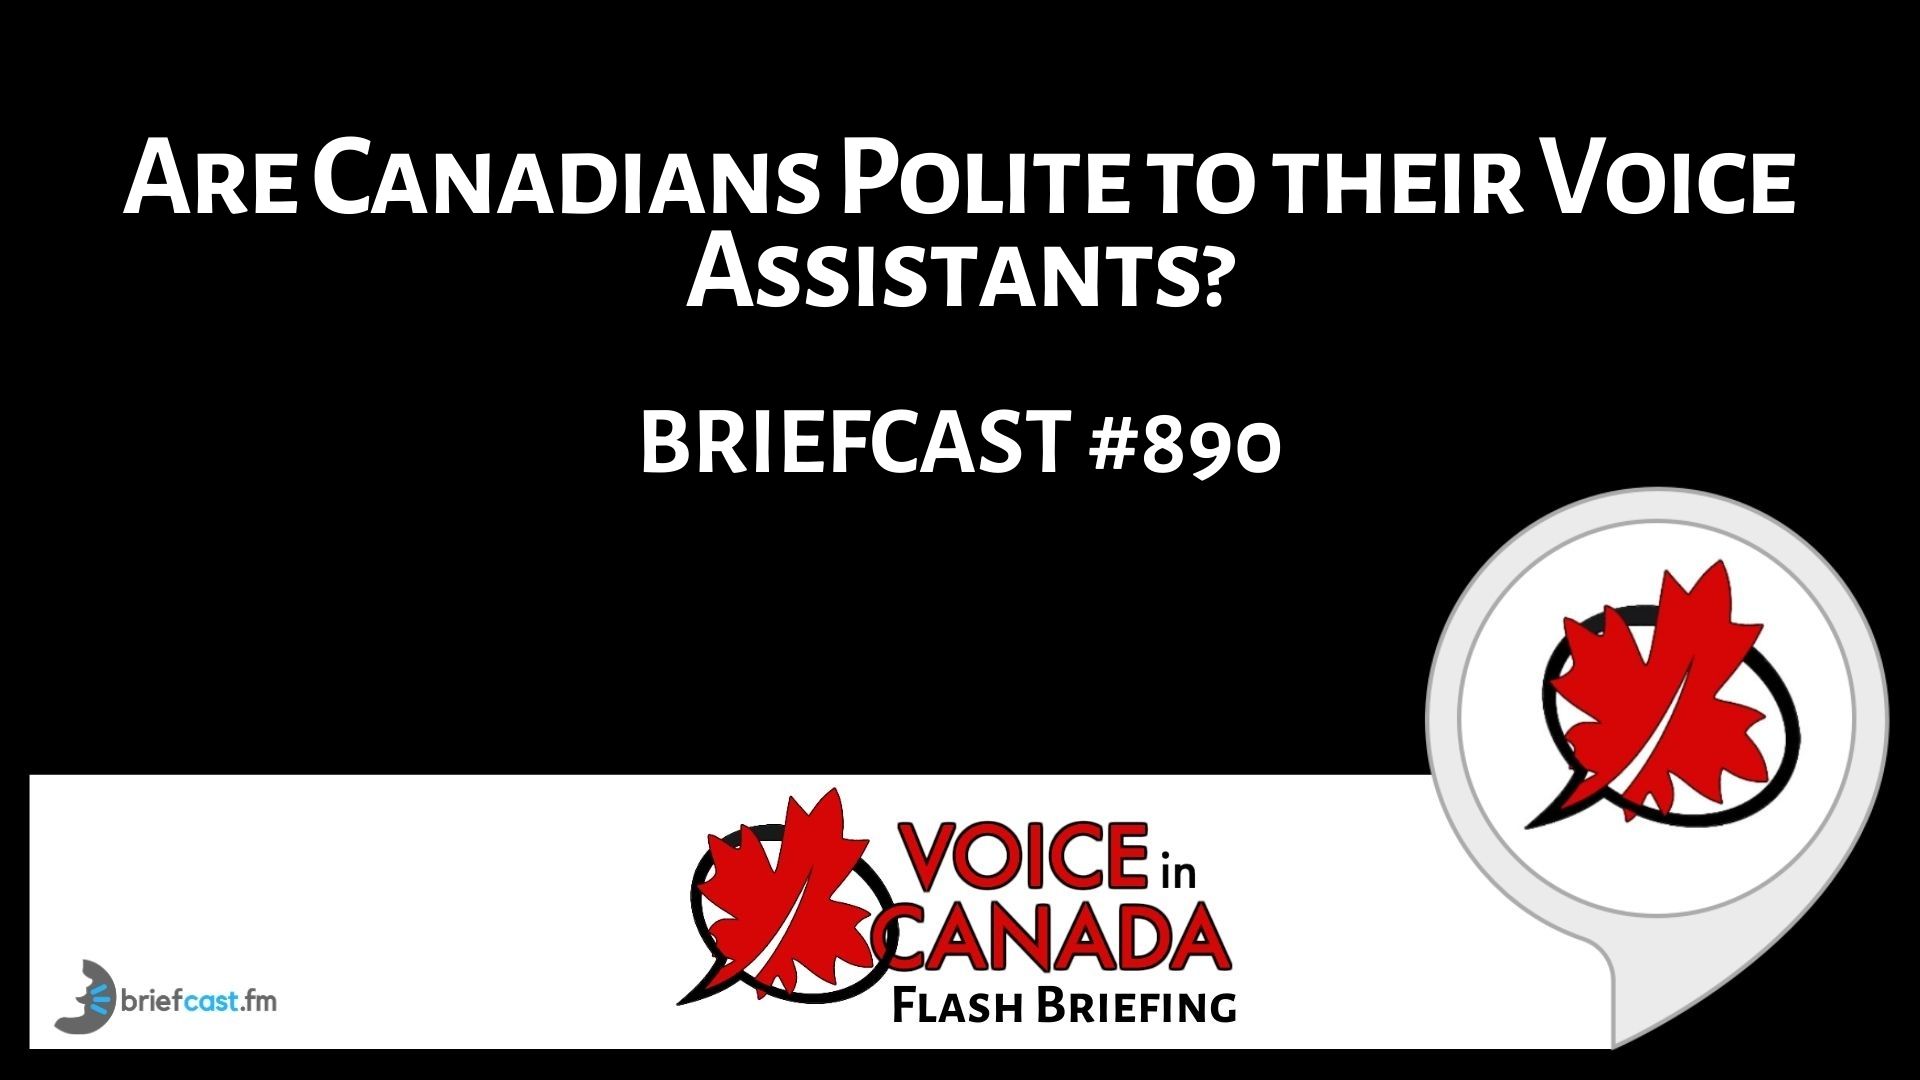 Are Canadians Polite to their Voice Assistants